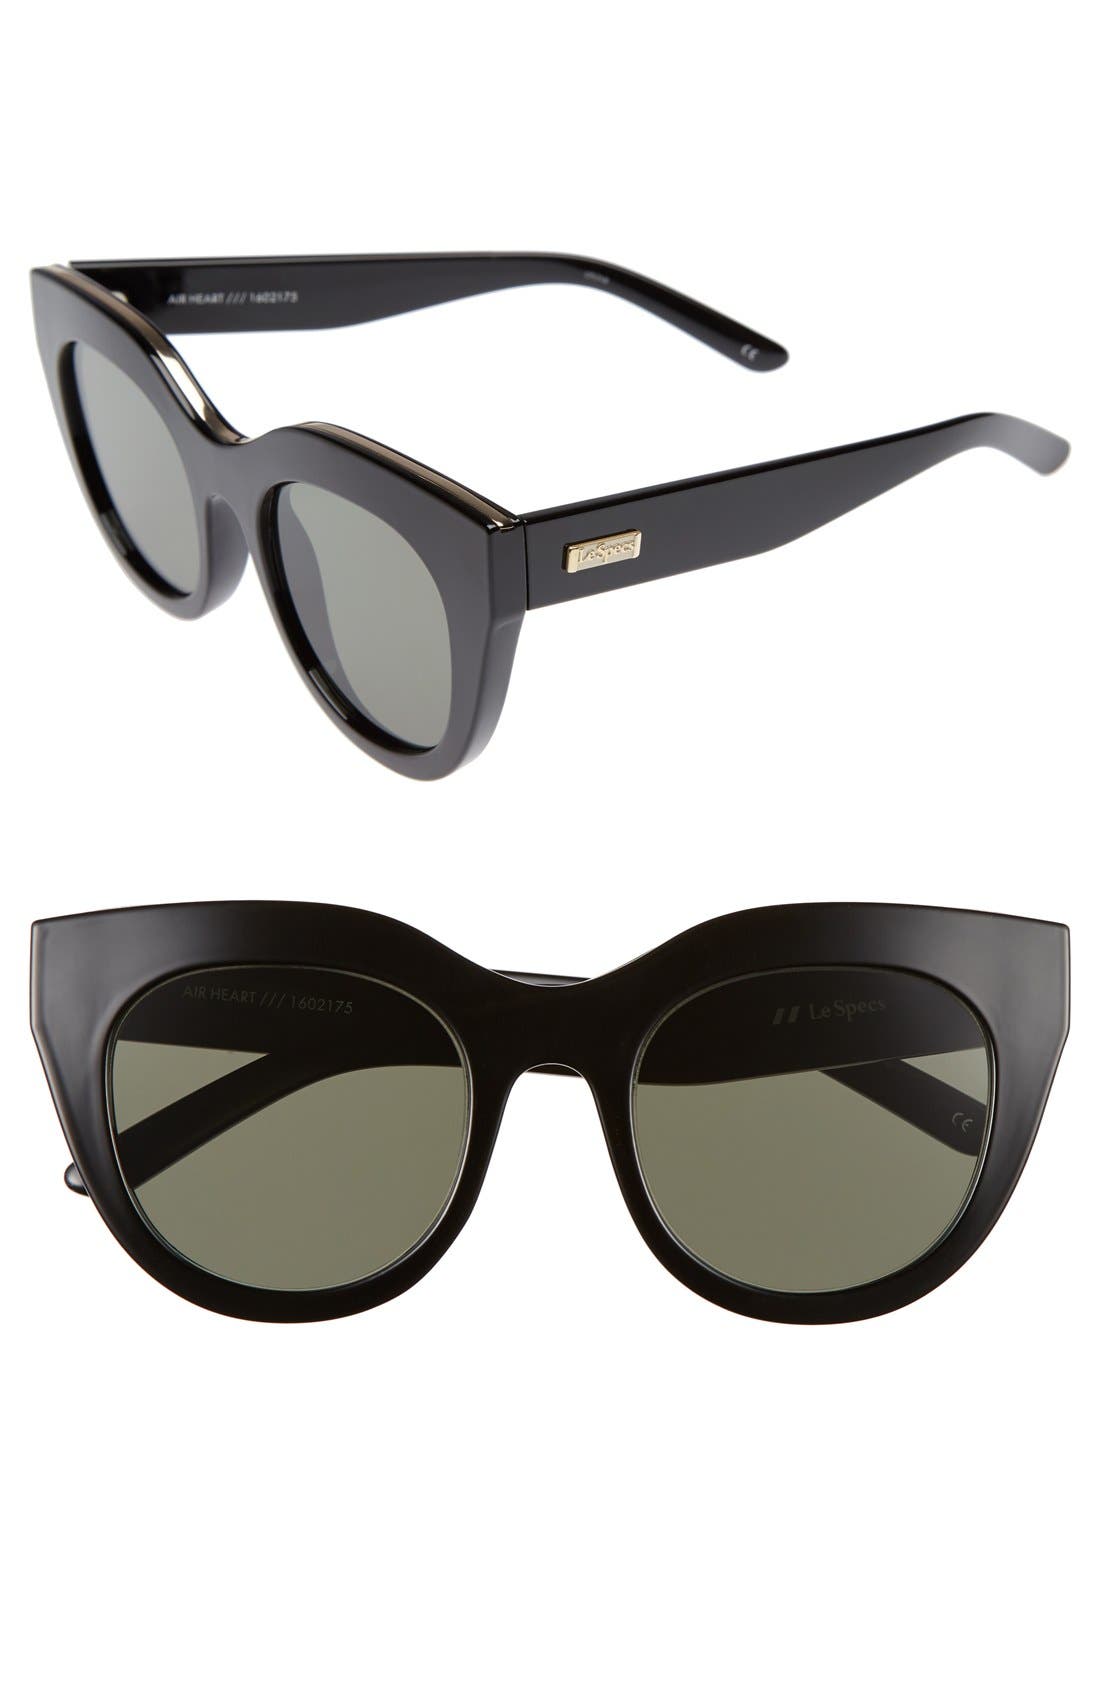 Le Specs Air Heart 51mm Sunglasses in Black/Gold at Nordstrom